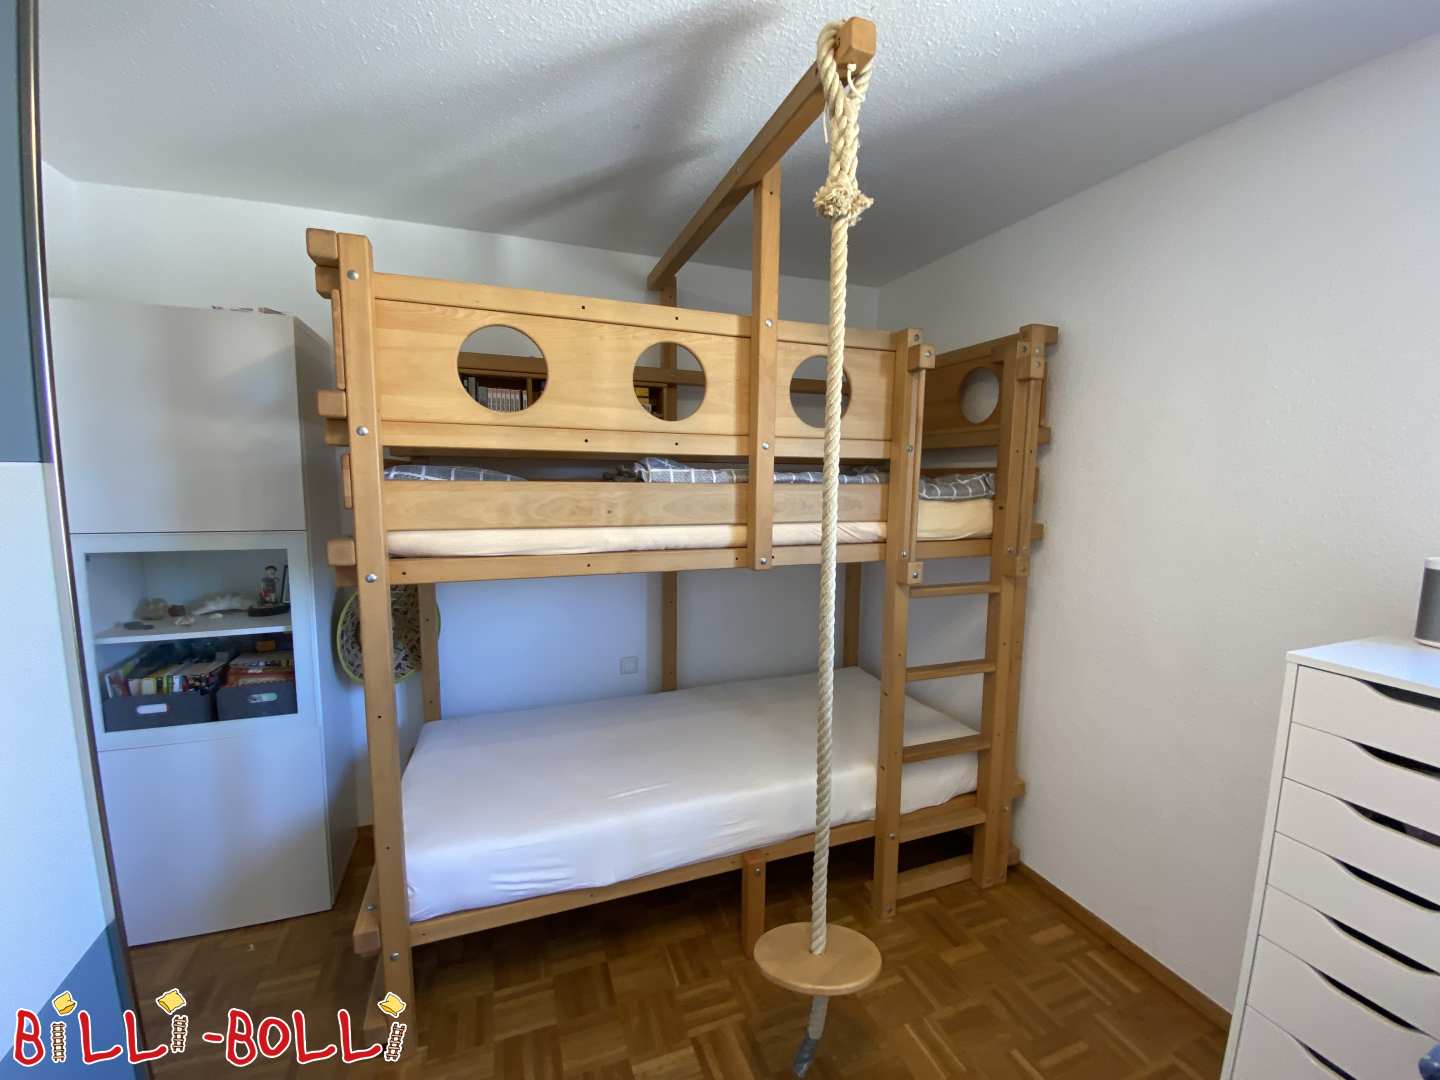 Growing loft bed incl. conversion set to bunk bed & various extras (Category: Loft Bed Adjustable by Age pre-owned)